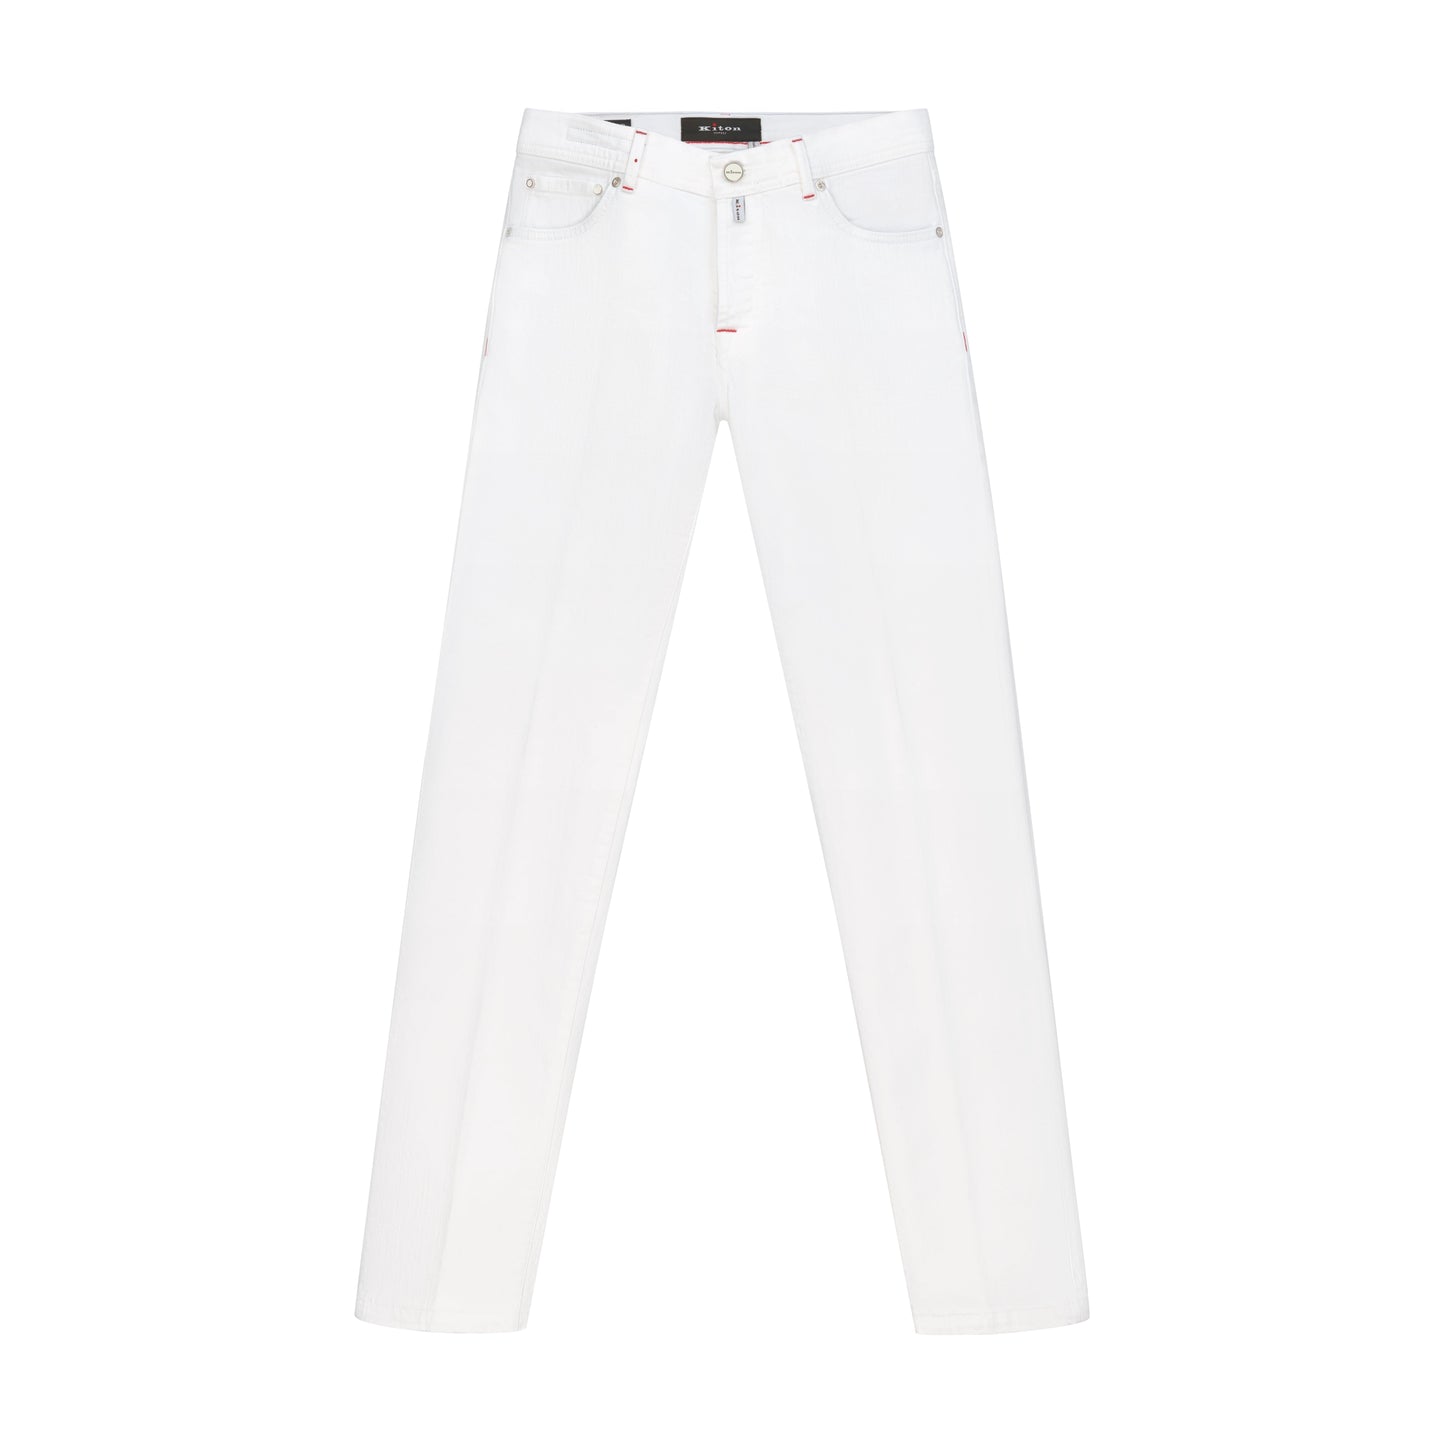 Slim-Fit Cotton Five-Pocket Jeans in White